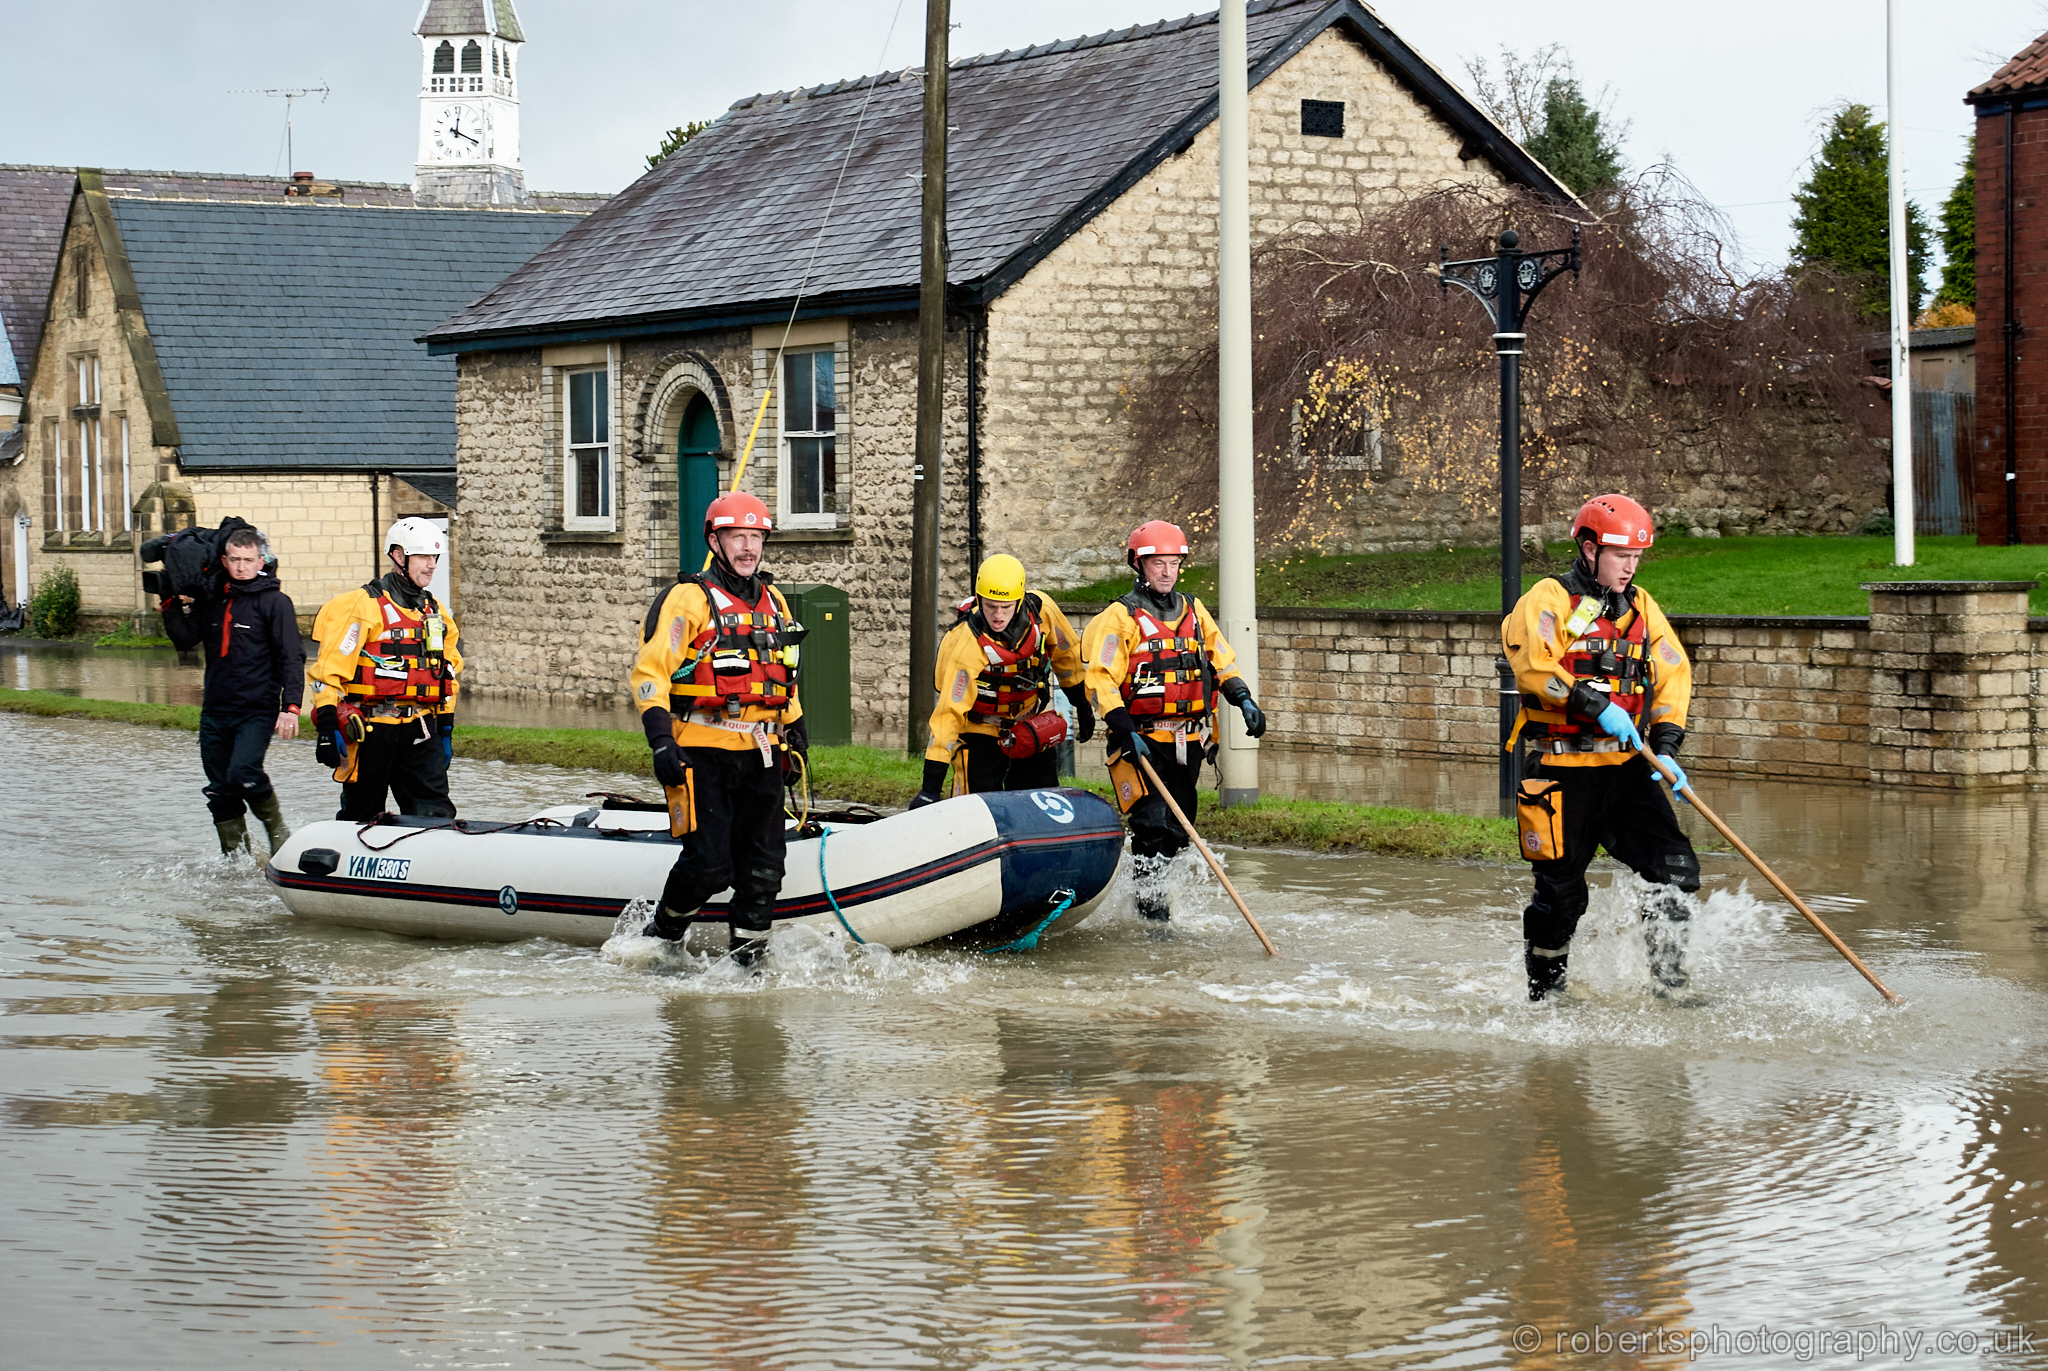 Malton Fire & Rescue are pictured rescuing people using an inflatable dingy